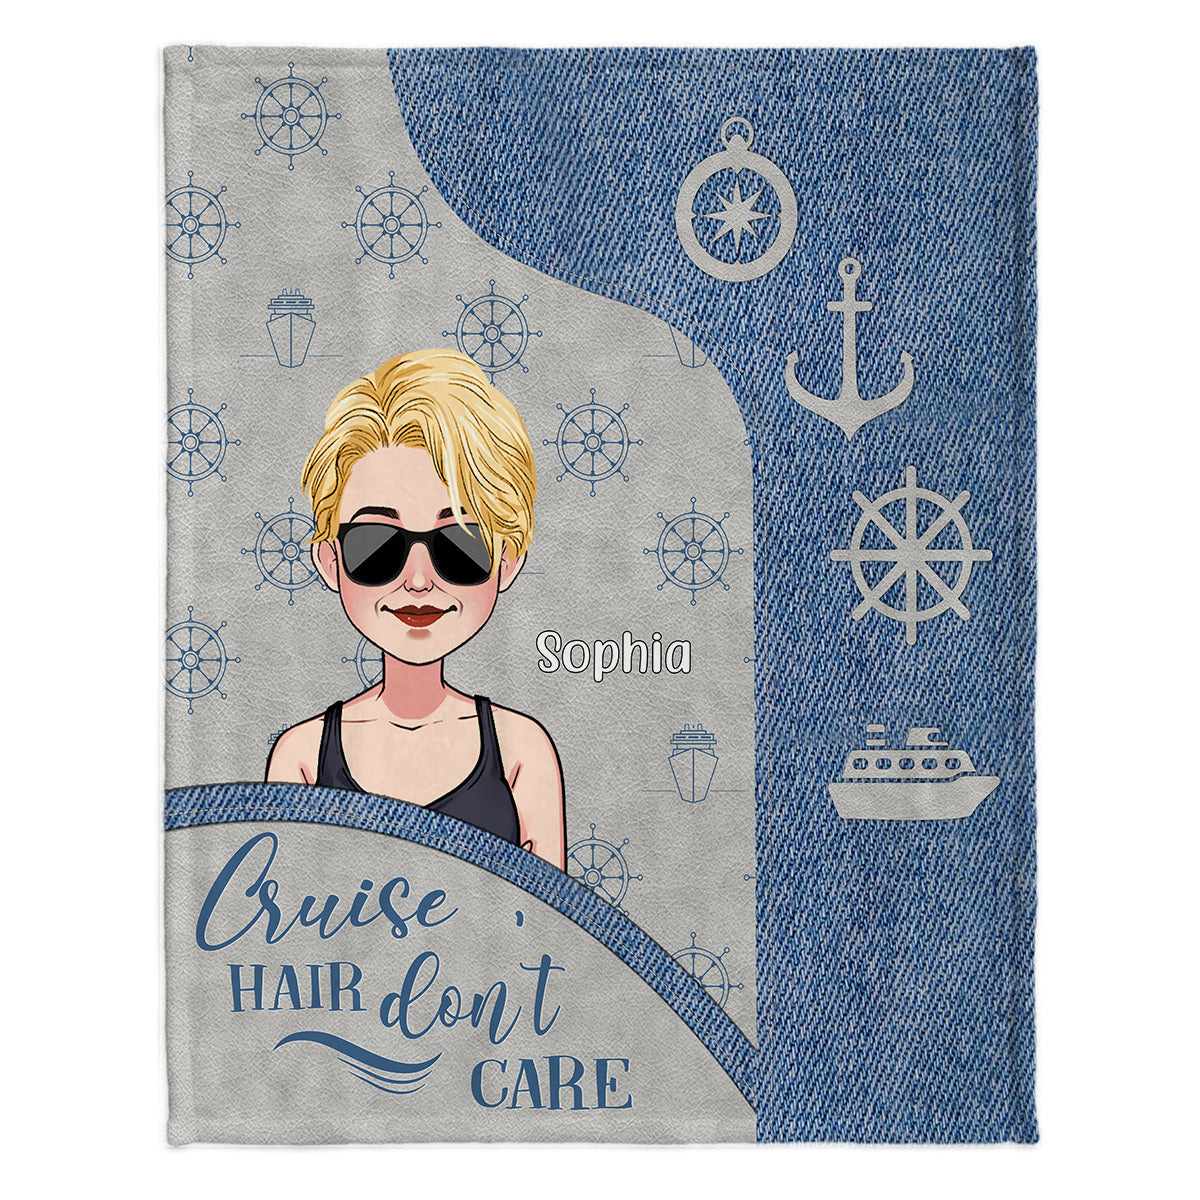 Cruise Hair Don't Care - Personalized Cruising Blanket